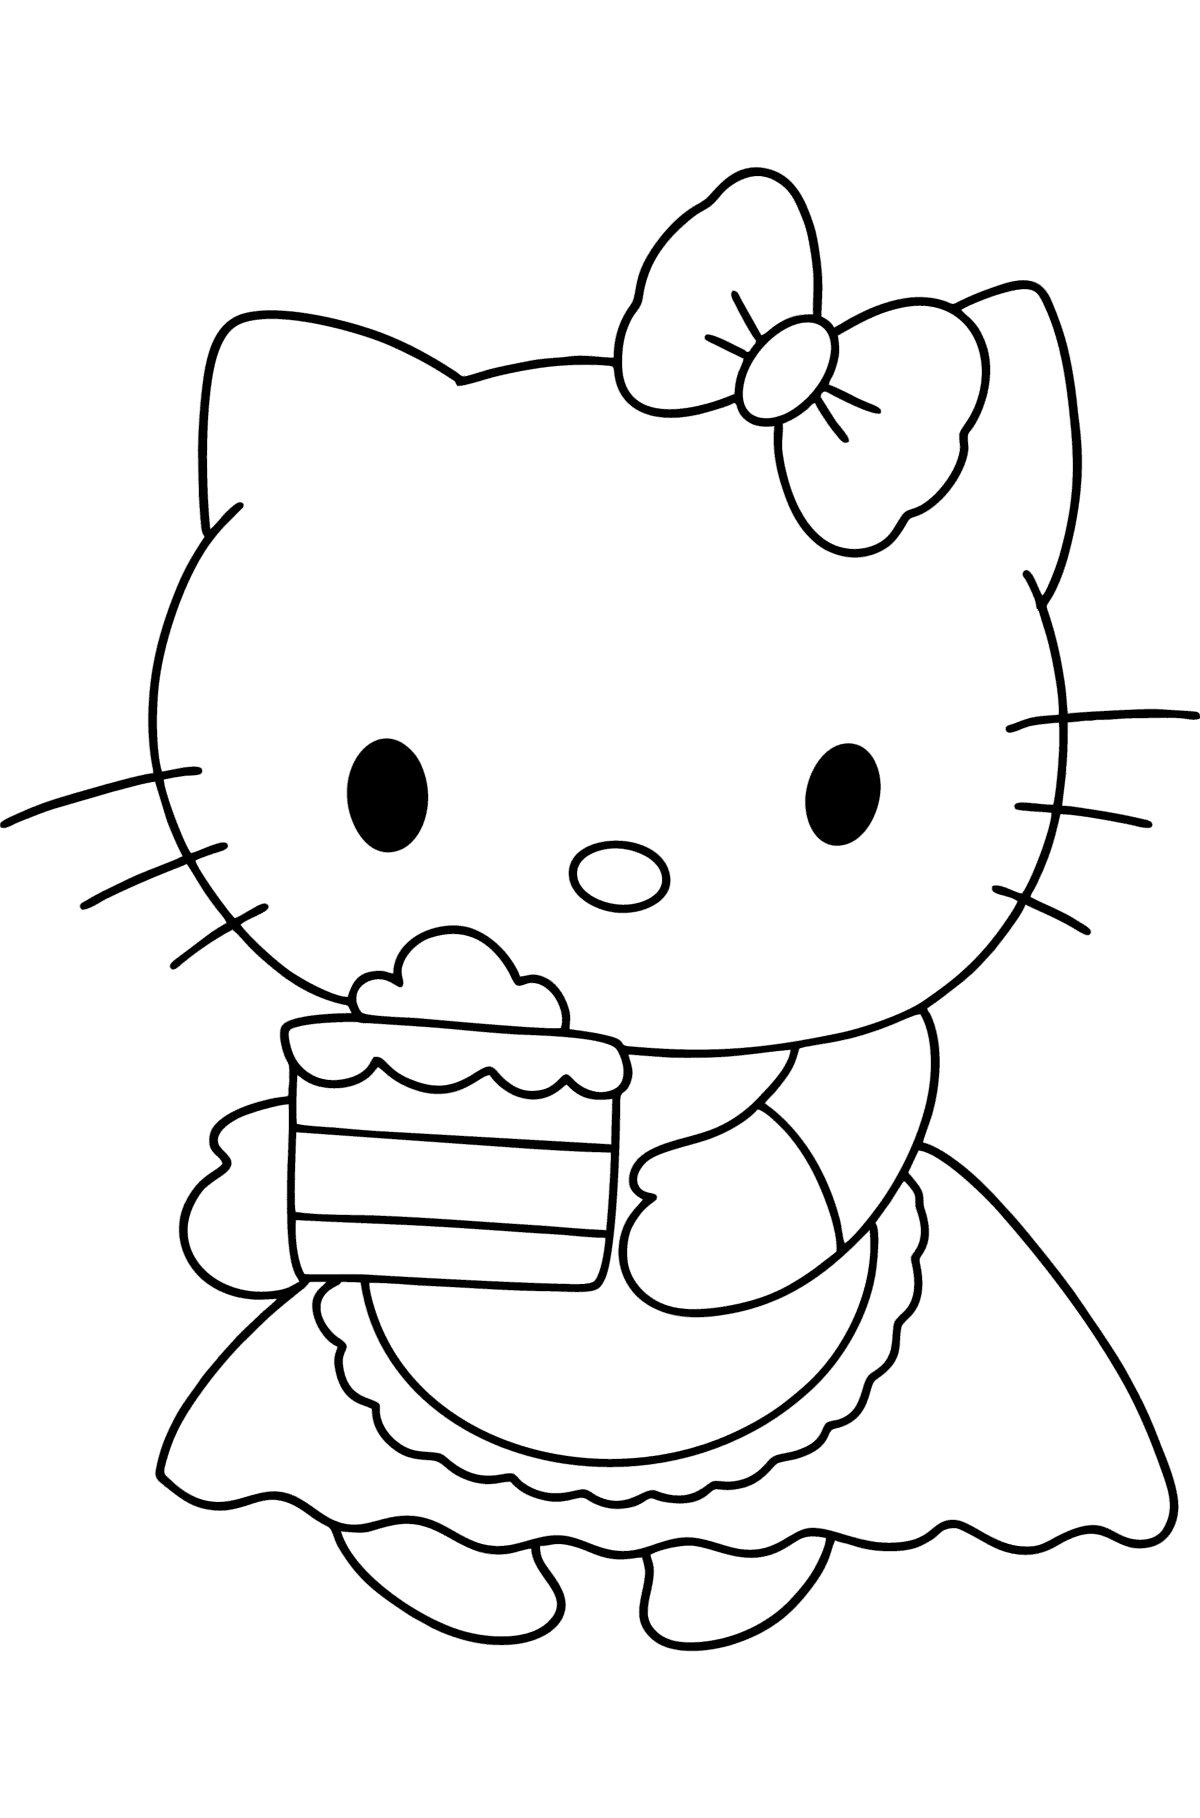 Hello Kitty and cake coloring page ♥ Online and Print for Free